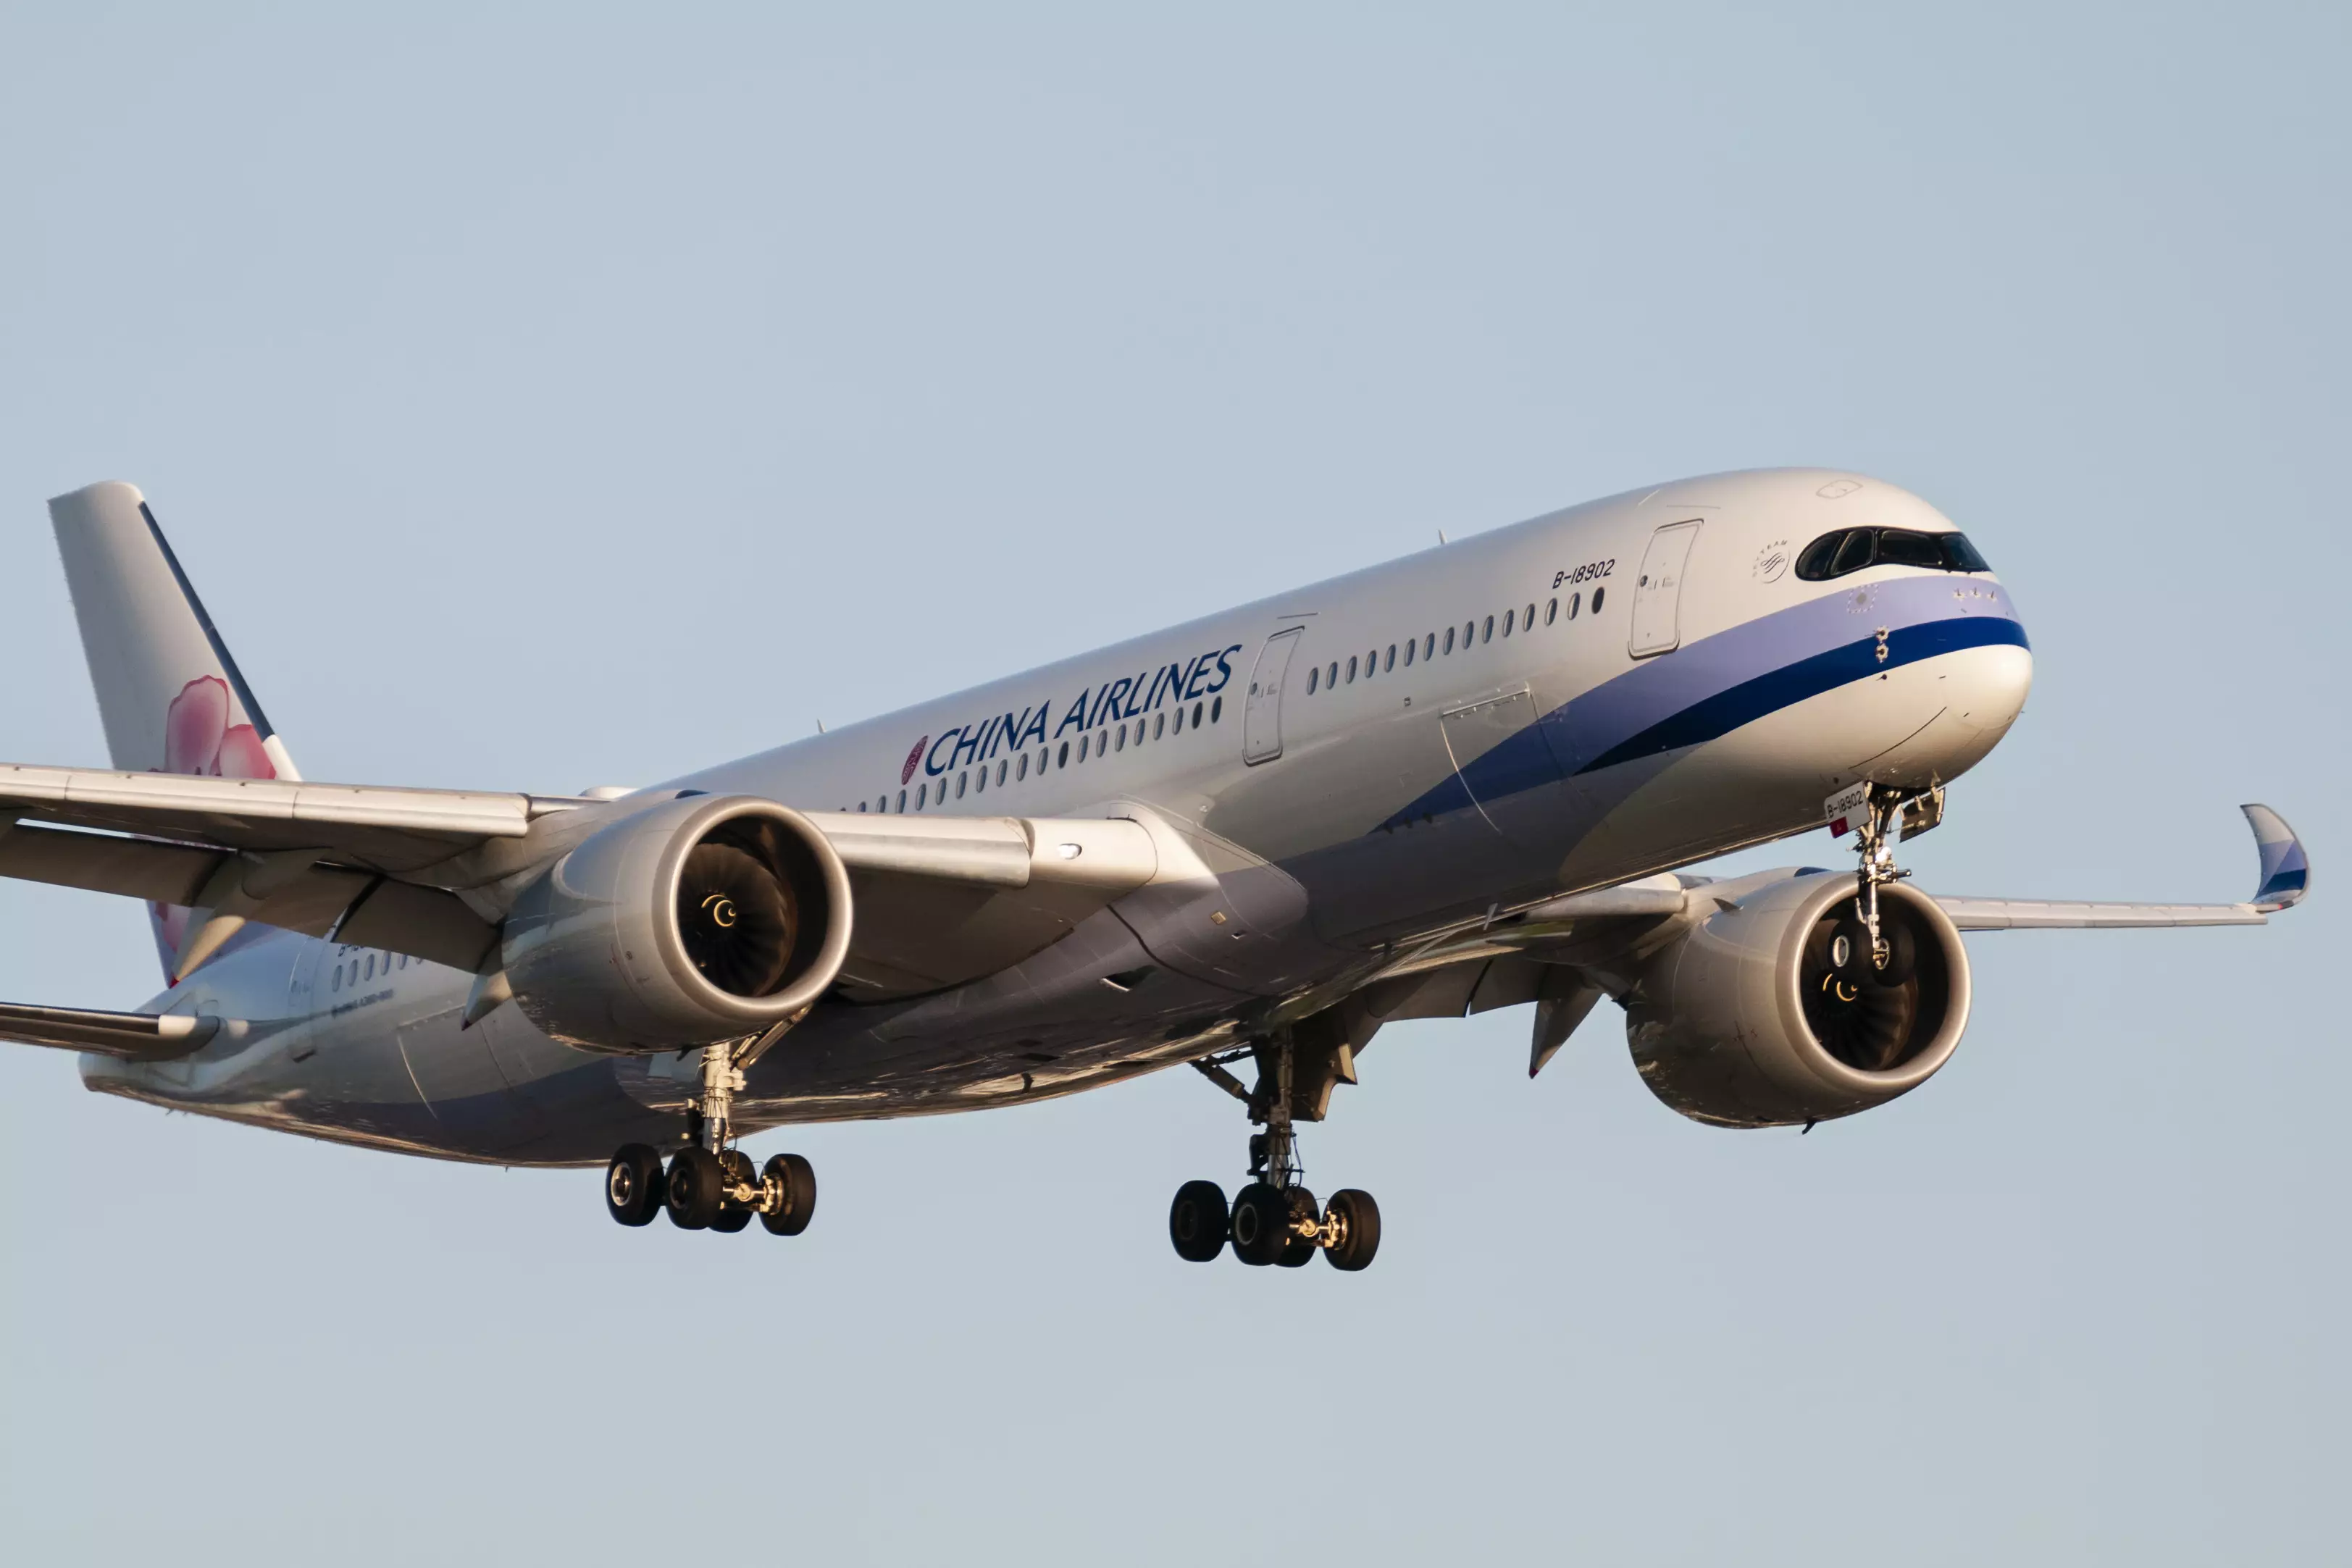 A China Airlines passenger jet.